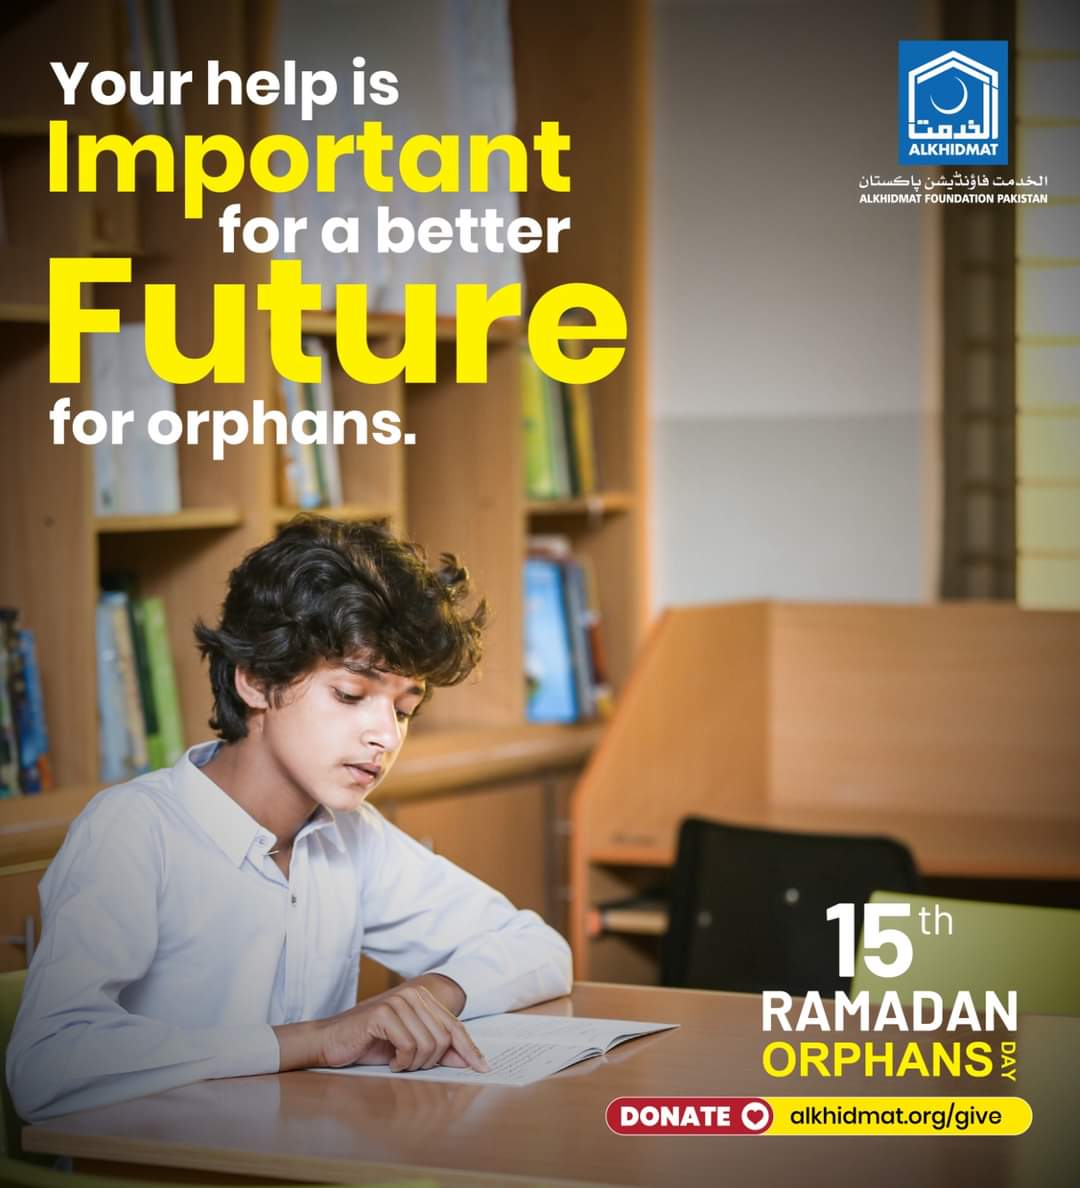 #OrphansDay_15Ramadan
I personally like Agosh set up of orphans from #AlkhidmatFoundation . Our charity give them hope .